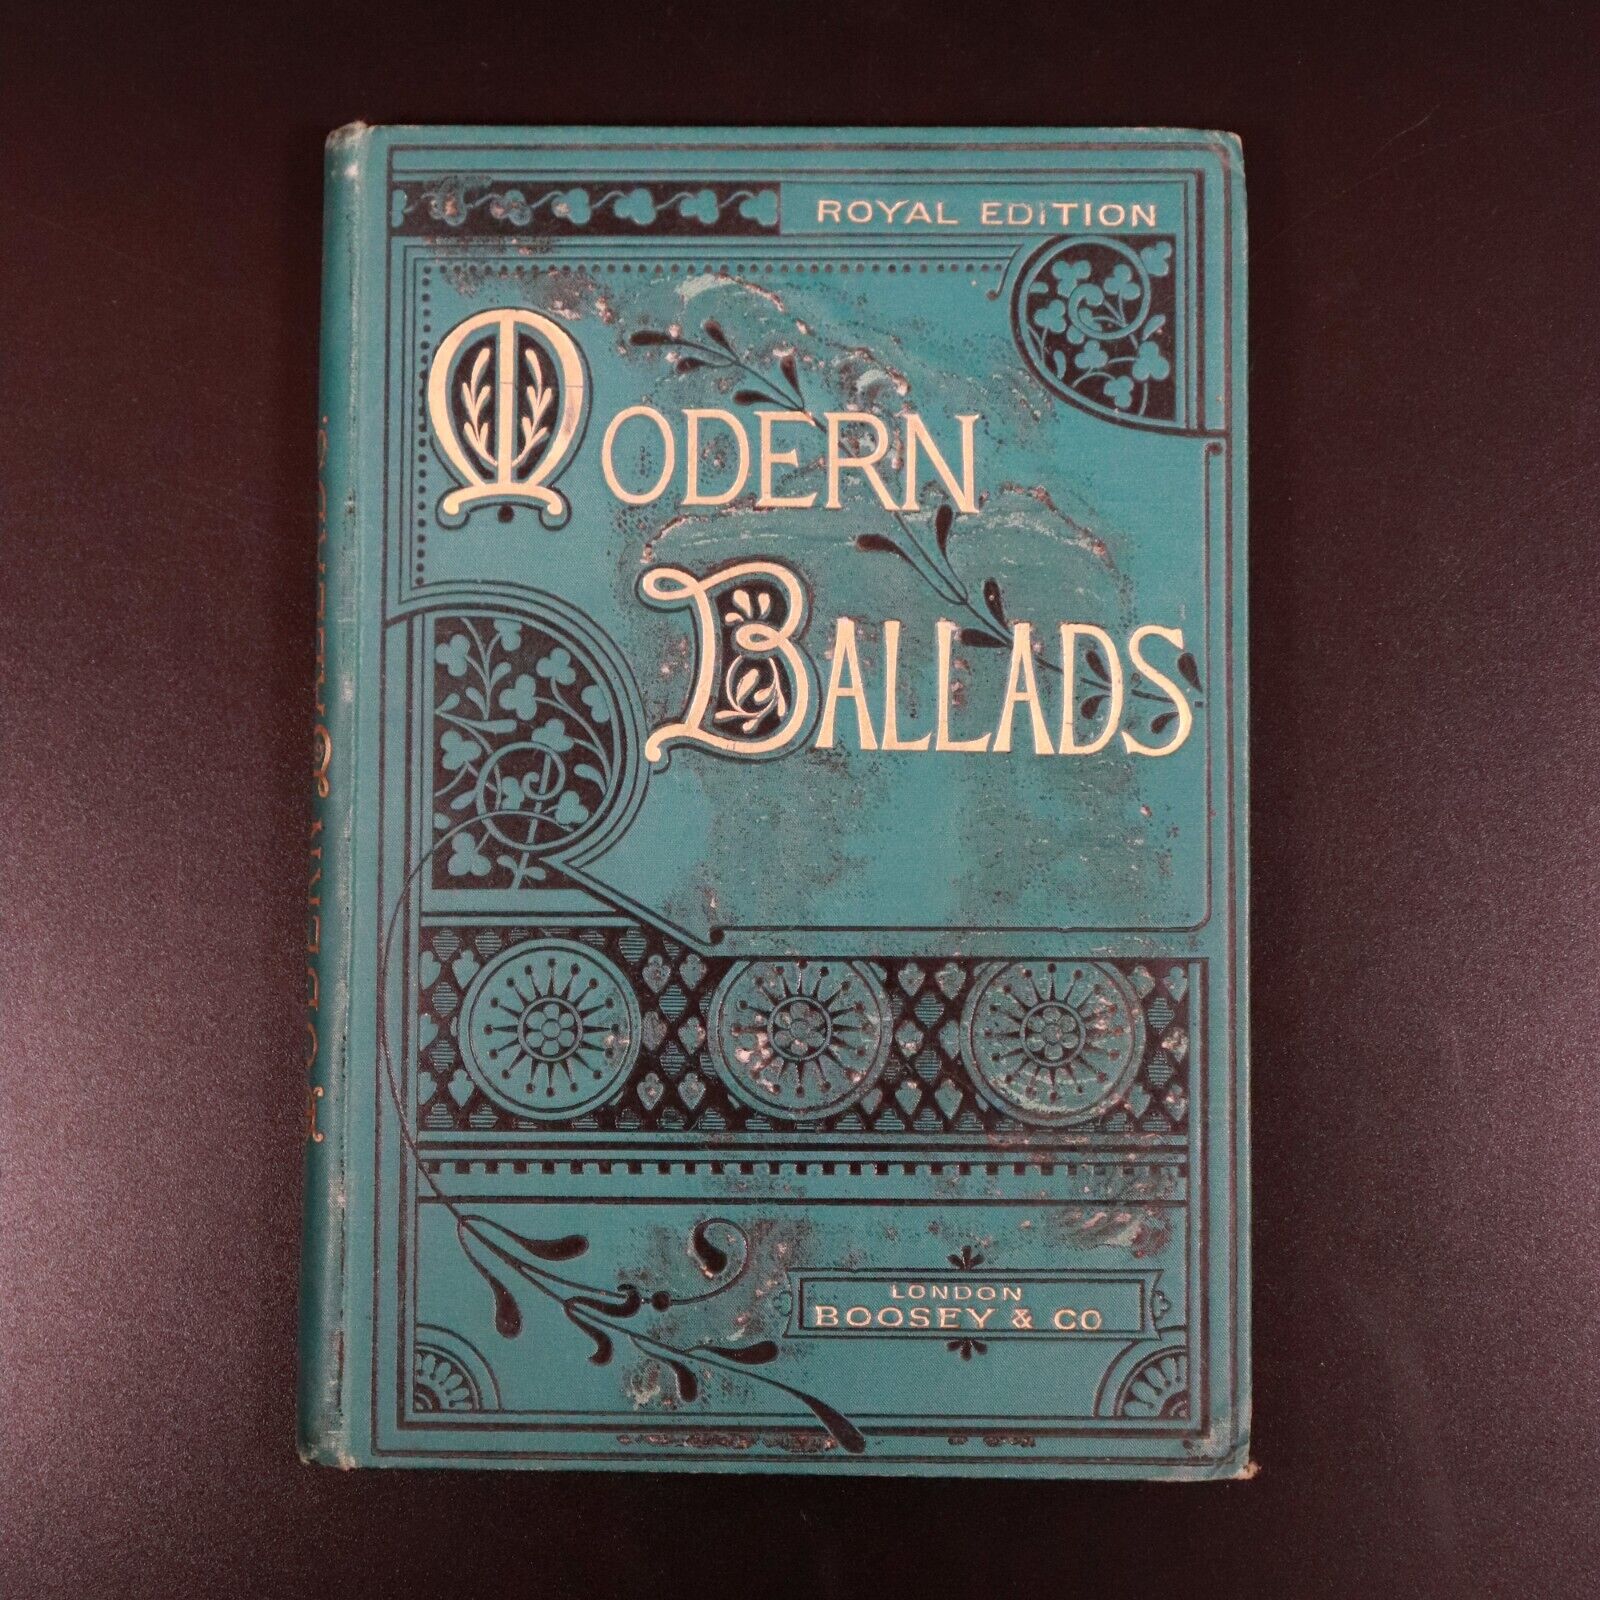 c1885 Modern Ballads by Eminent Composers Antique Classical Music Reference Book